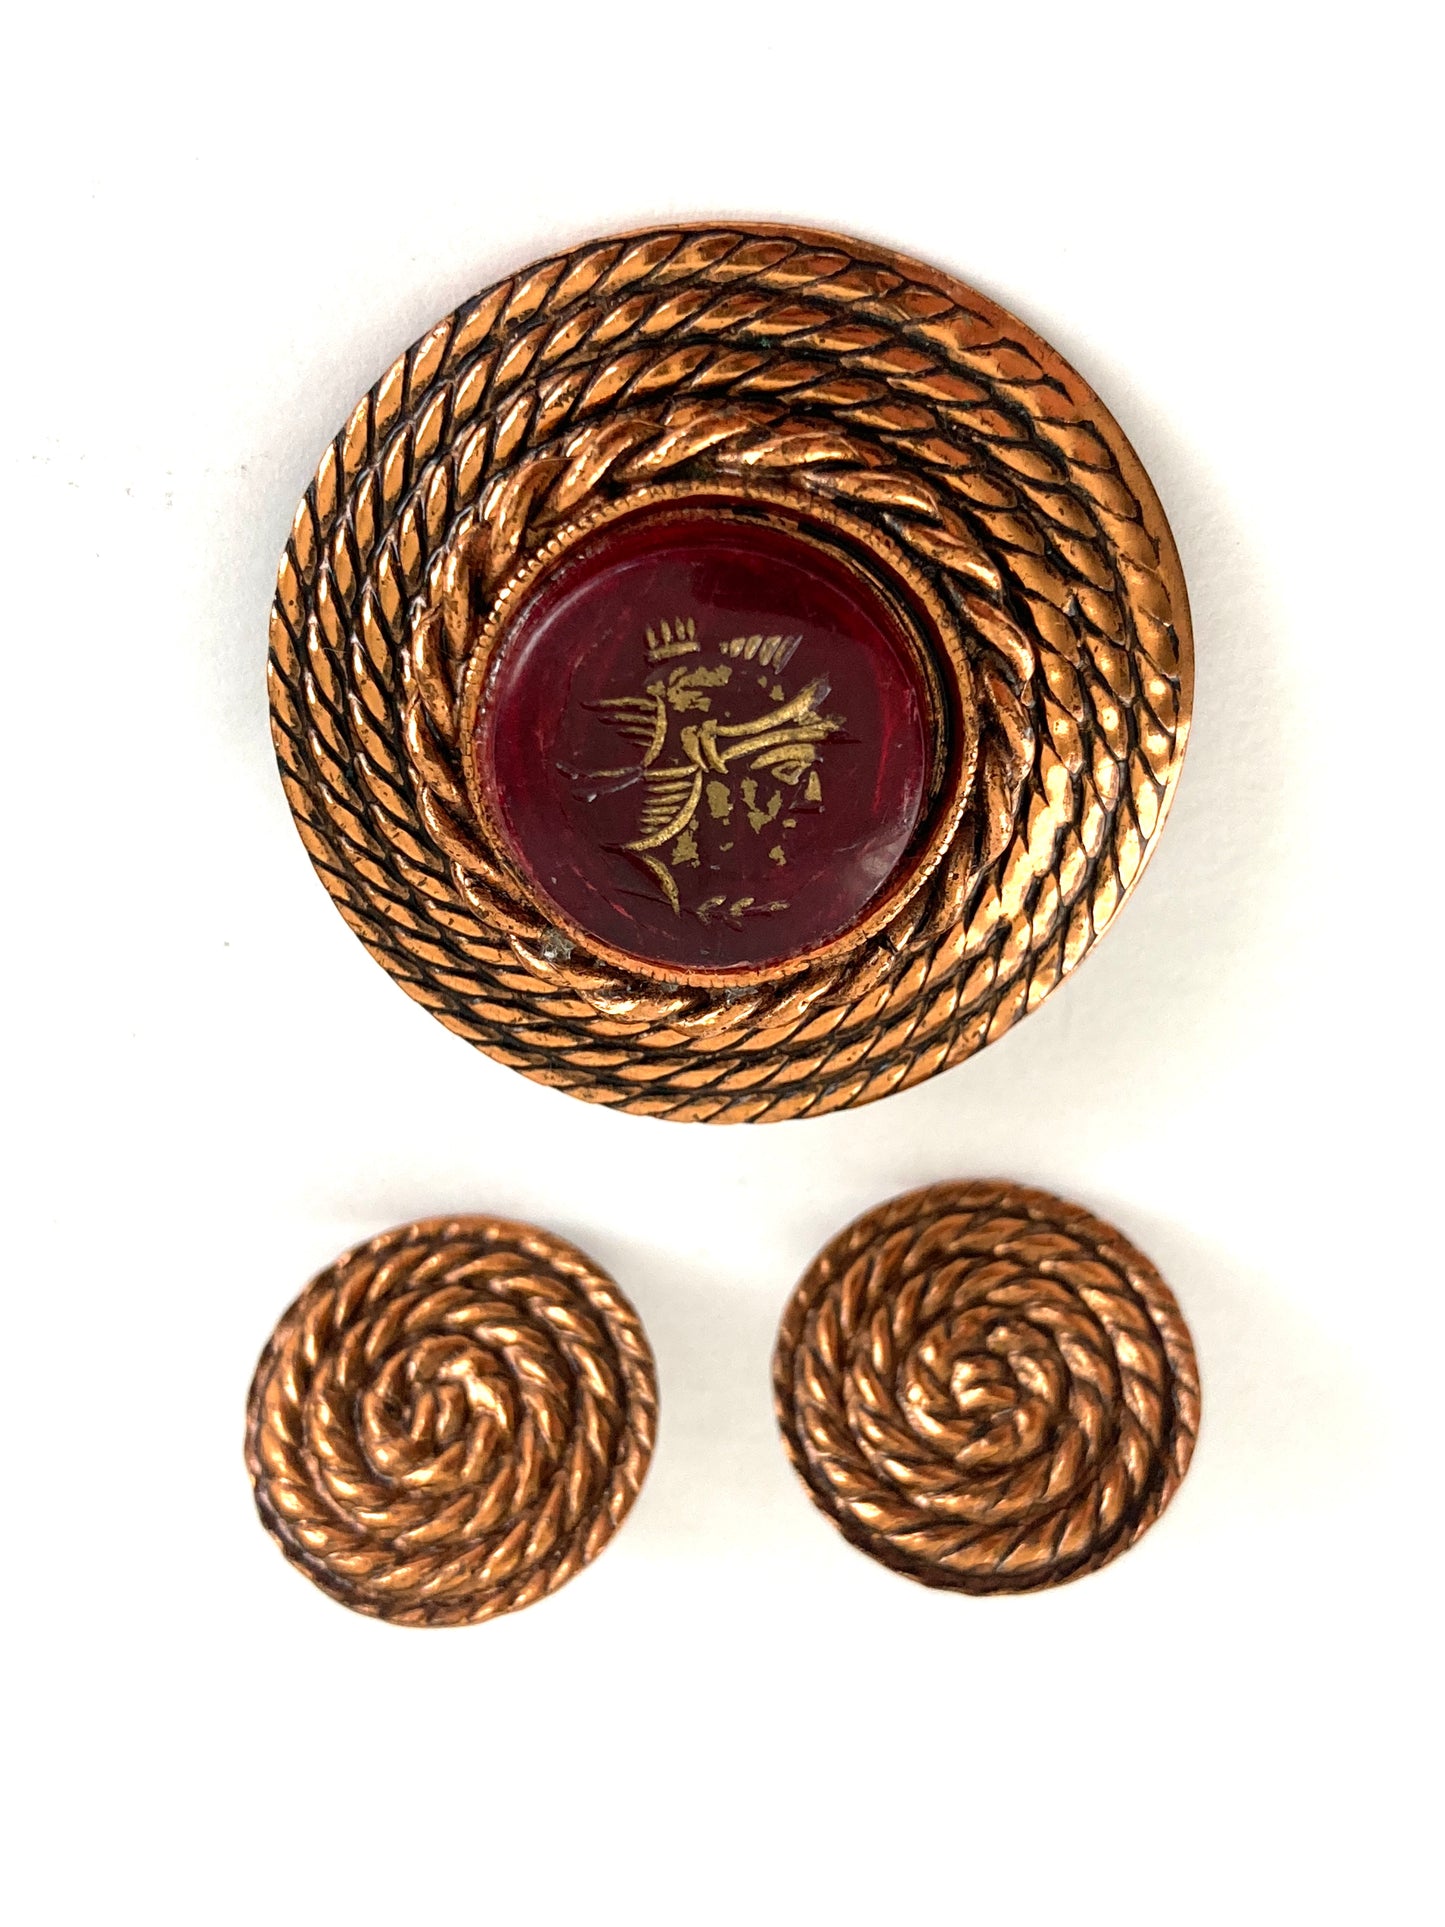 Braided Copper Brooch and Earrings Set with Intaglio